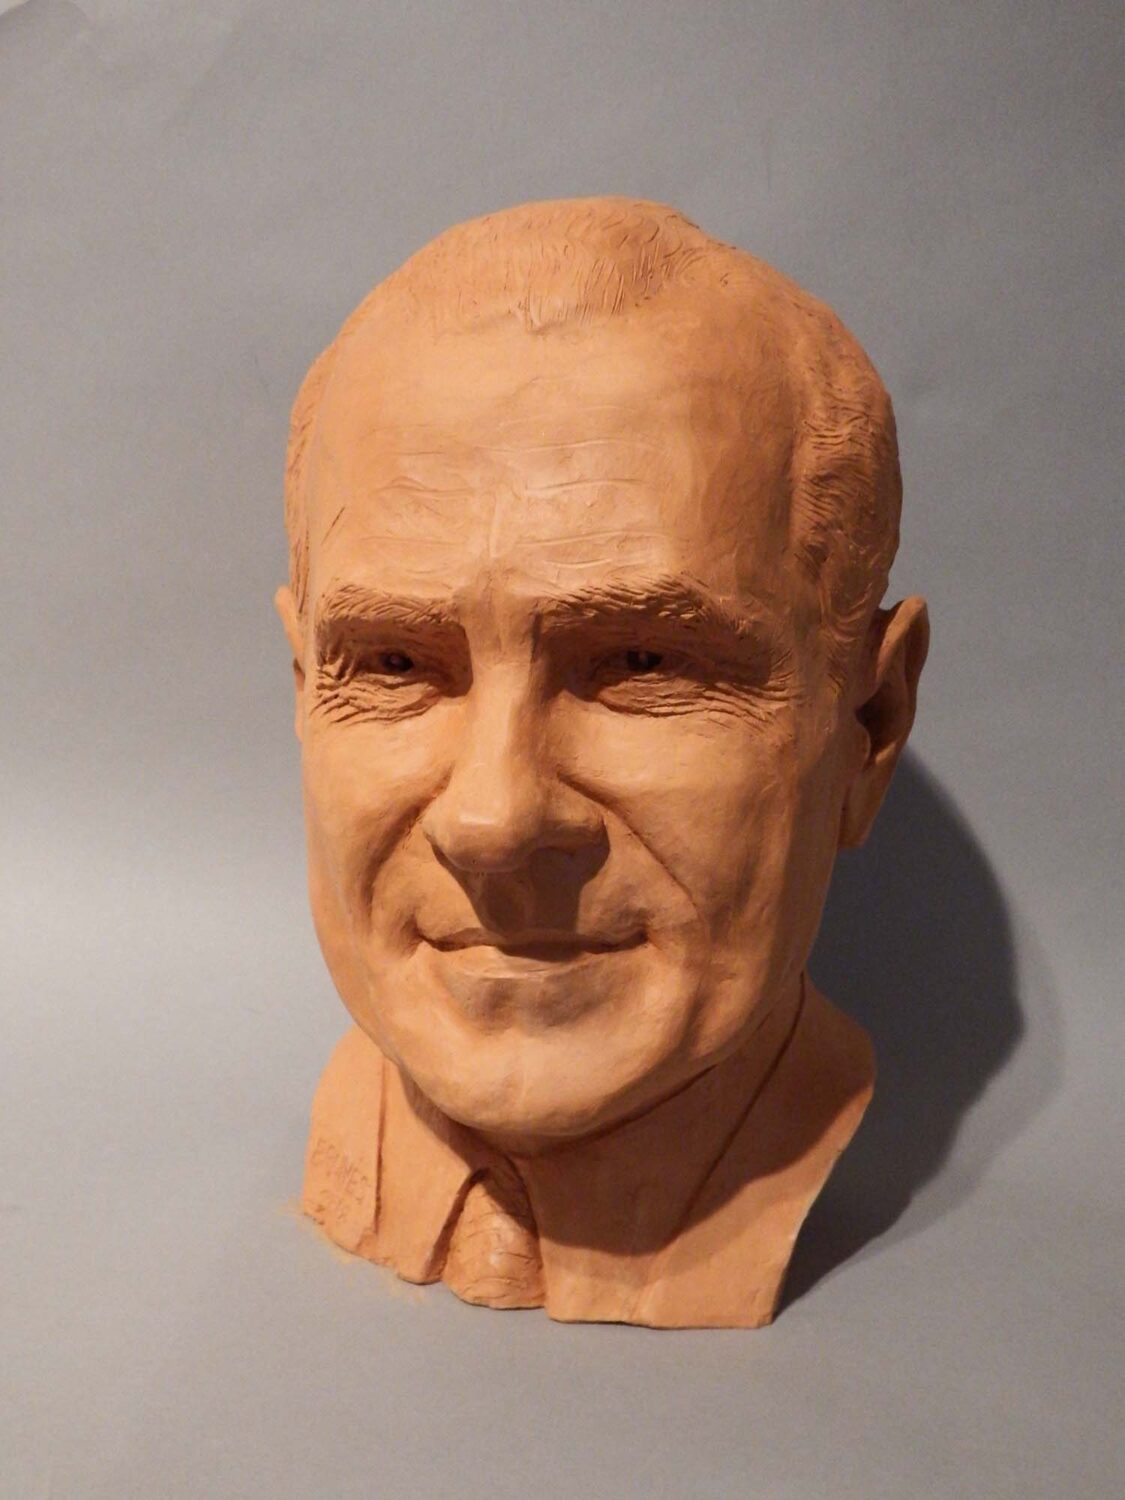 thumbnail of Statue of Richard Nixon made out of Terra cotta.